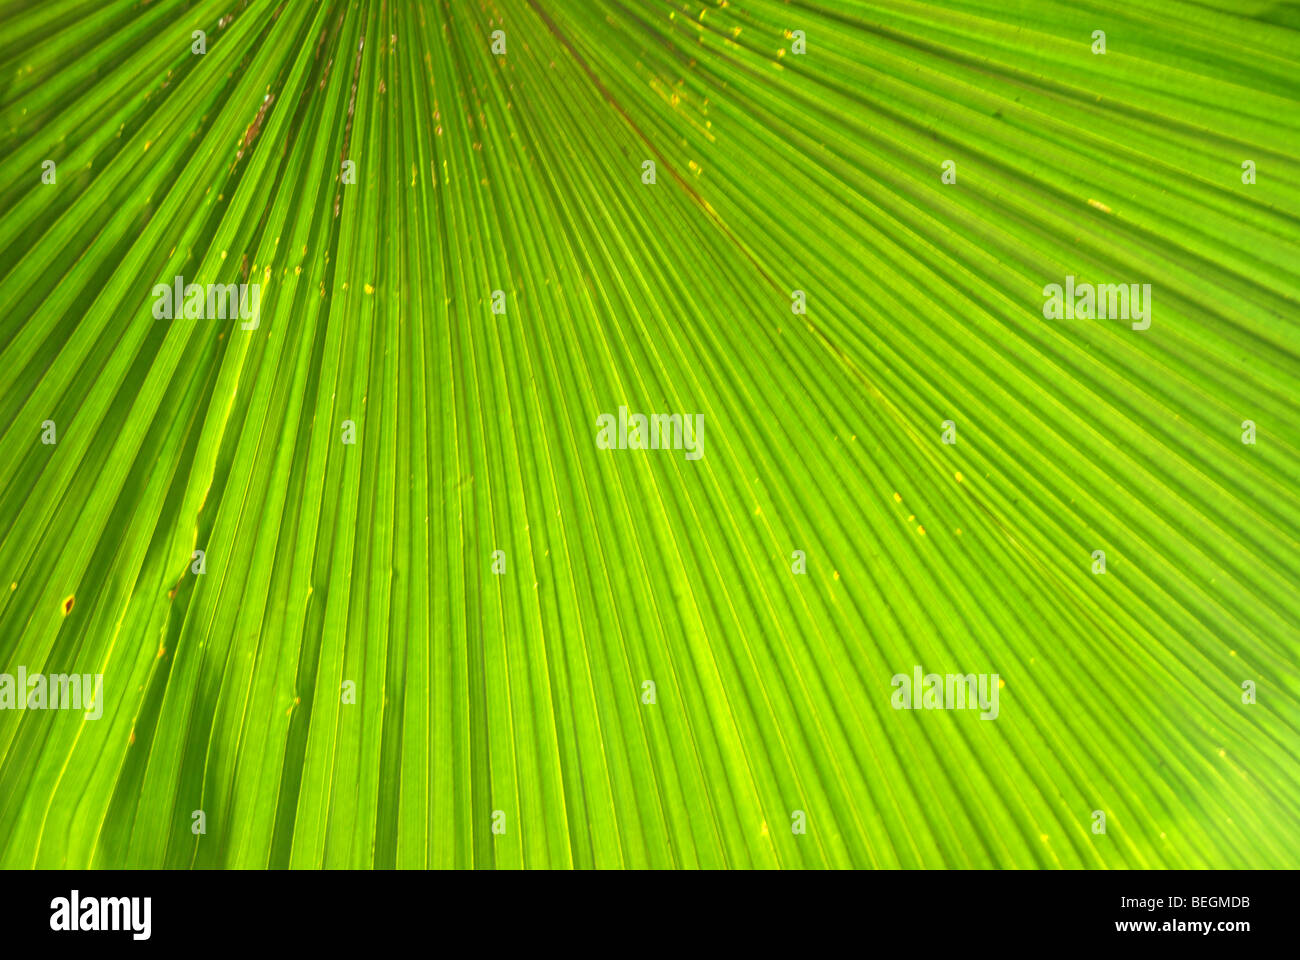 abstract pattern of palm leaf, Singapore Stock Photo